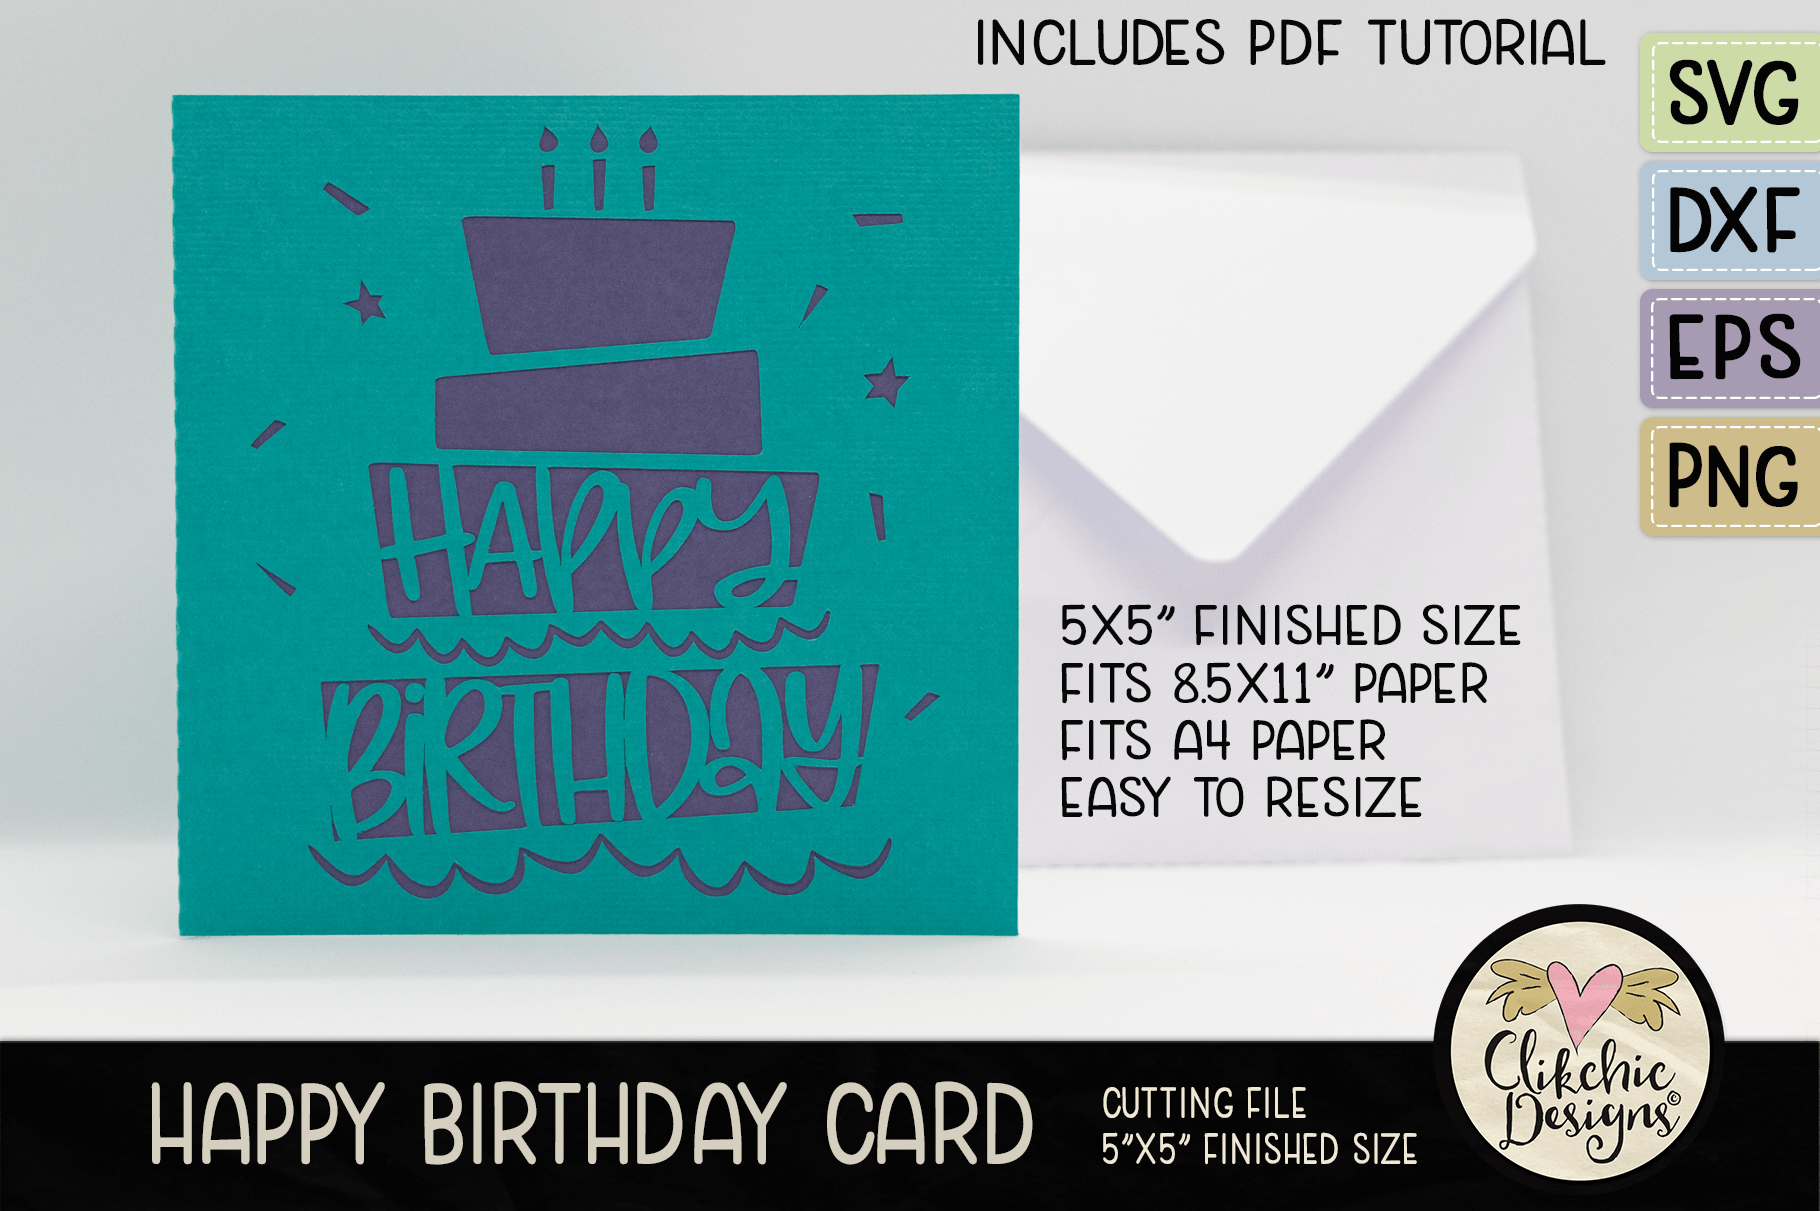 Make Great Cake on a Card with this Quirky Birthday SVG | Clikchic Designs